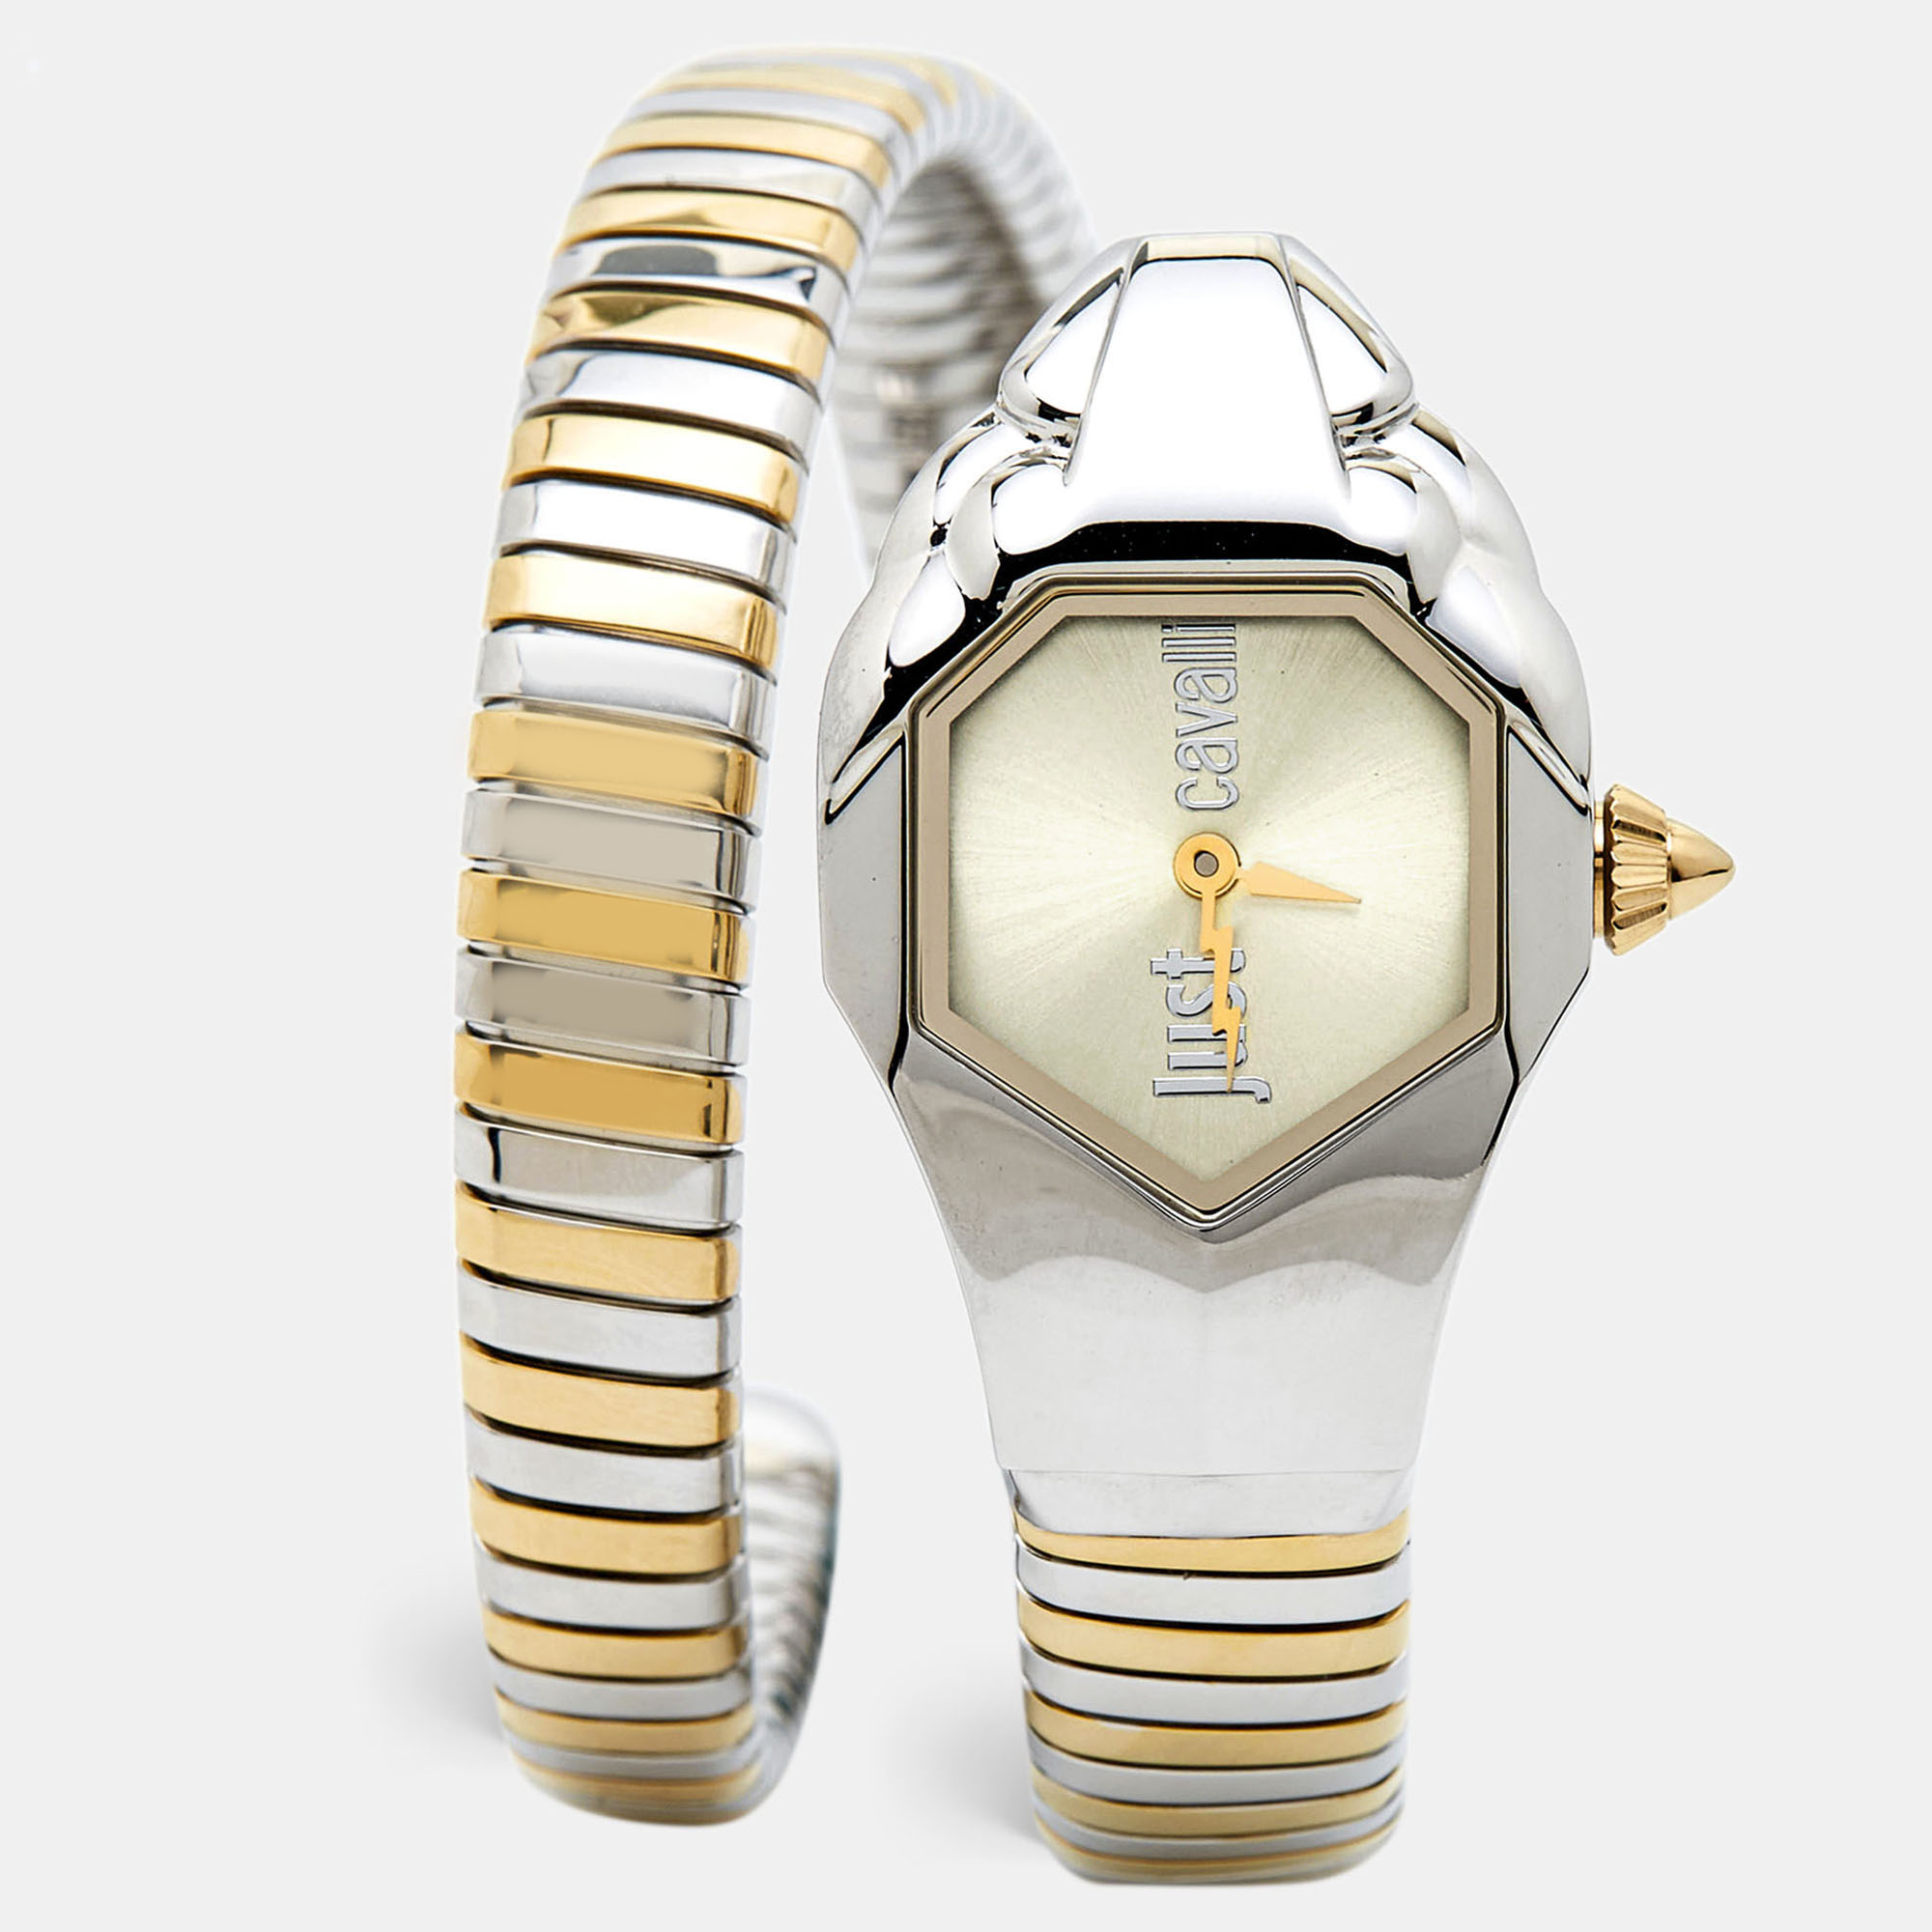 

Just Cavalli Champagne Two-Tone Stainless Steel Glam Chic Snake JC1L001M0035 Women's Wristwatch, Gold